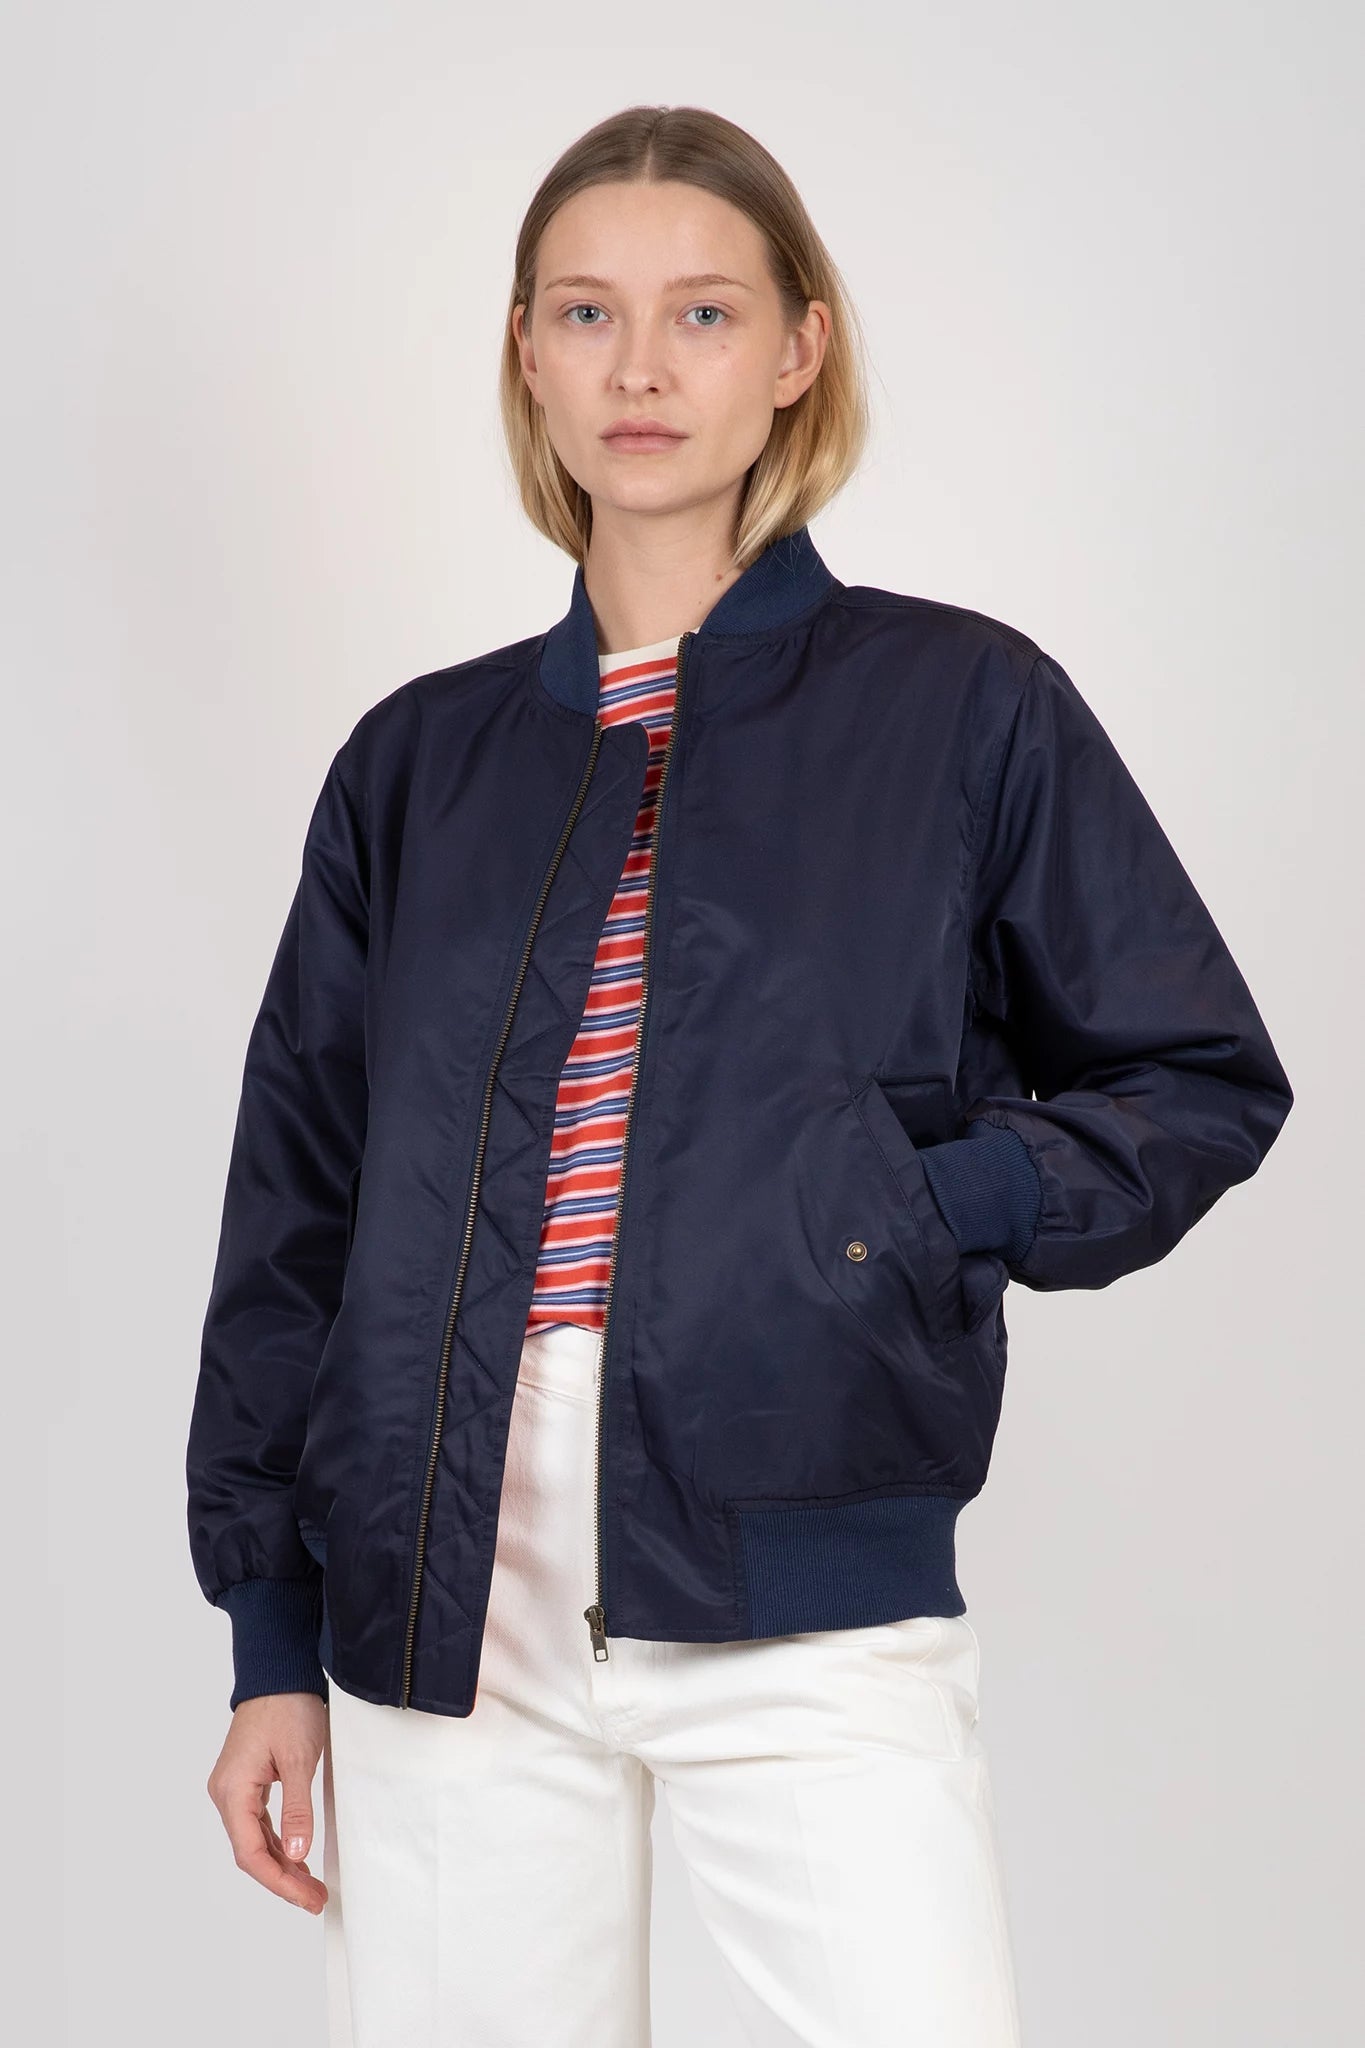 The Aerial Bomber Jackets & Coats The Great   